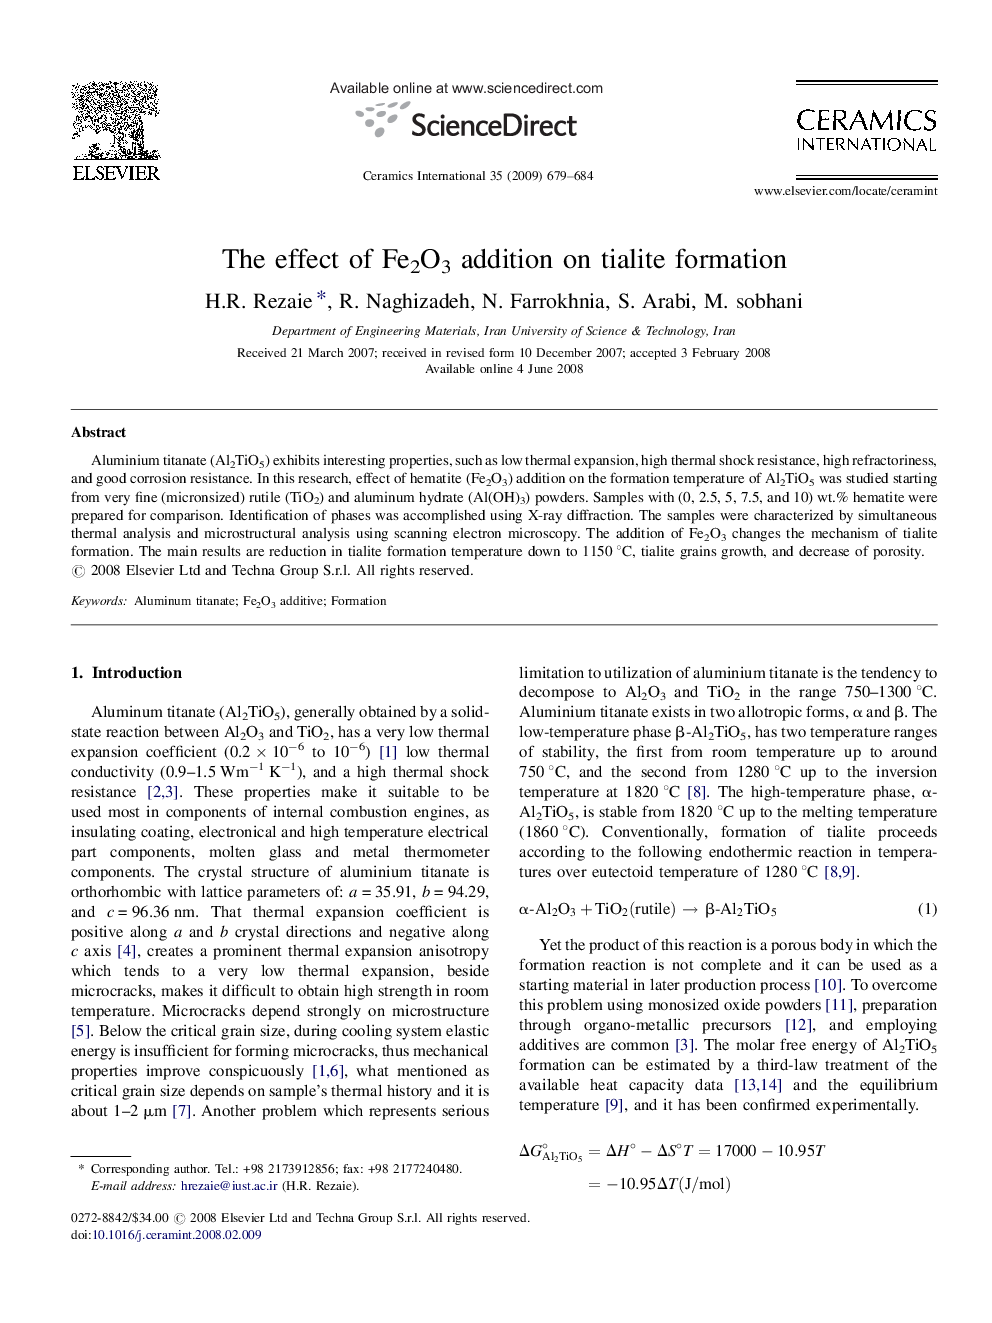 The effect of Fe2O3 addition on tialite formation